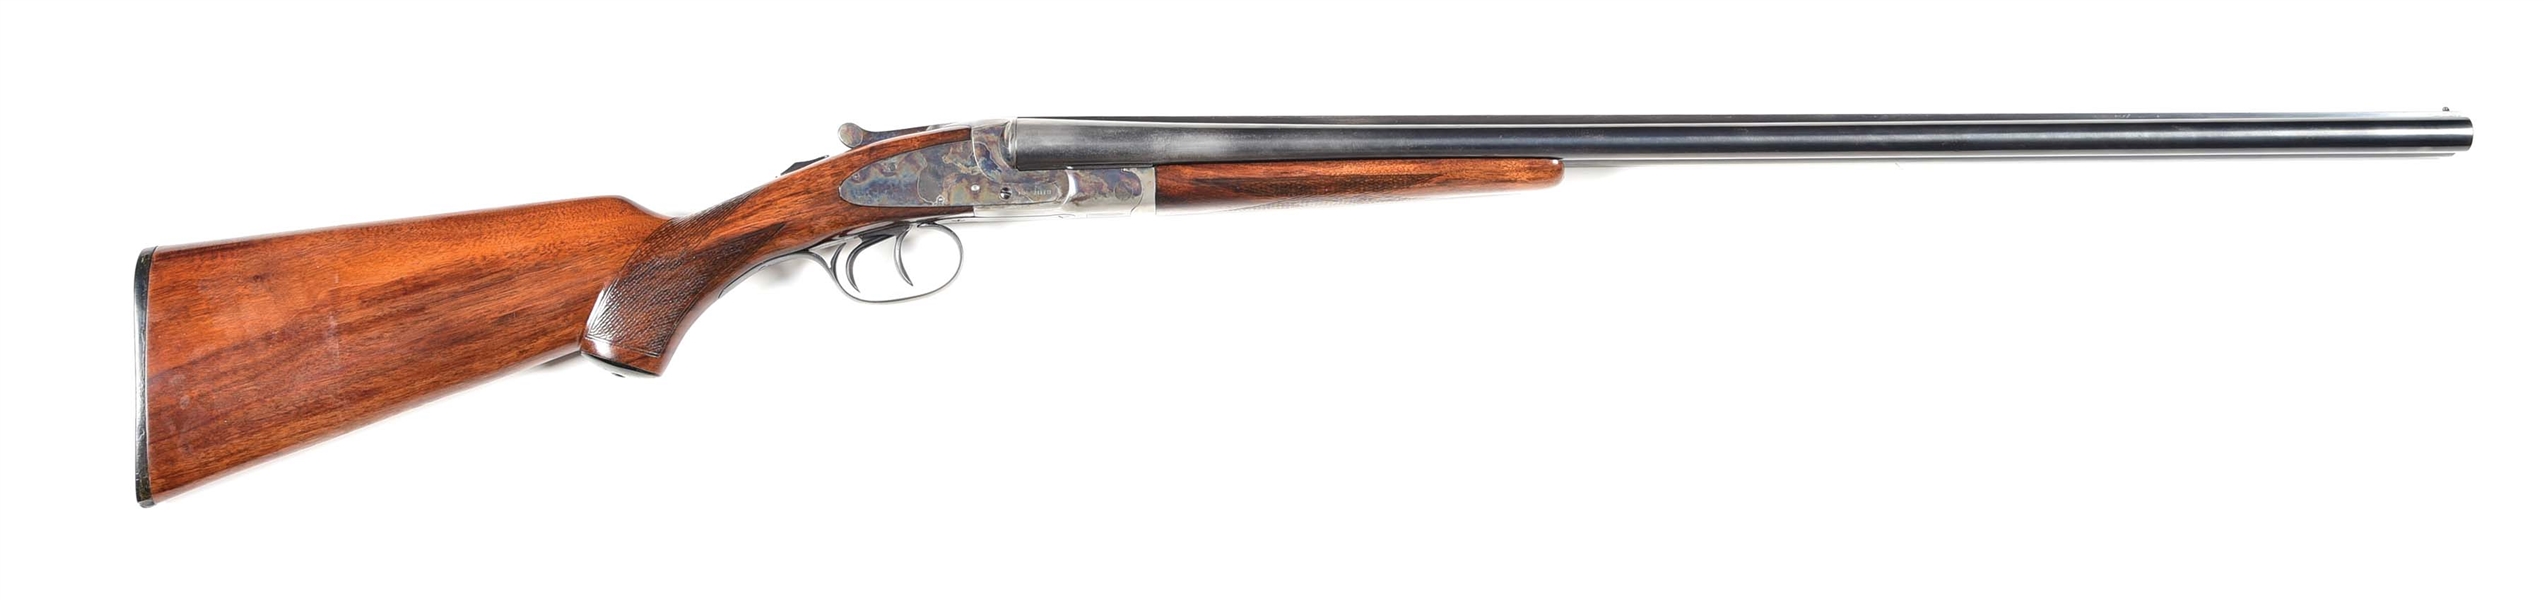 (C) L.C. SMITH FEATHERWEIGHT FIELD GRADE 20 BORE SIDE BY SIDE SHOTGUN.